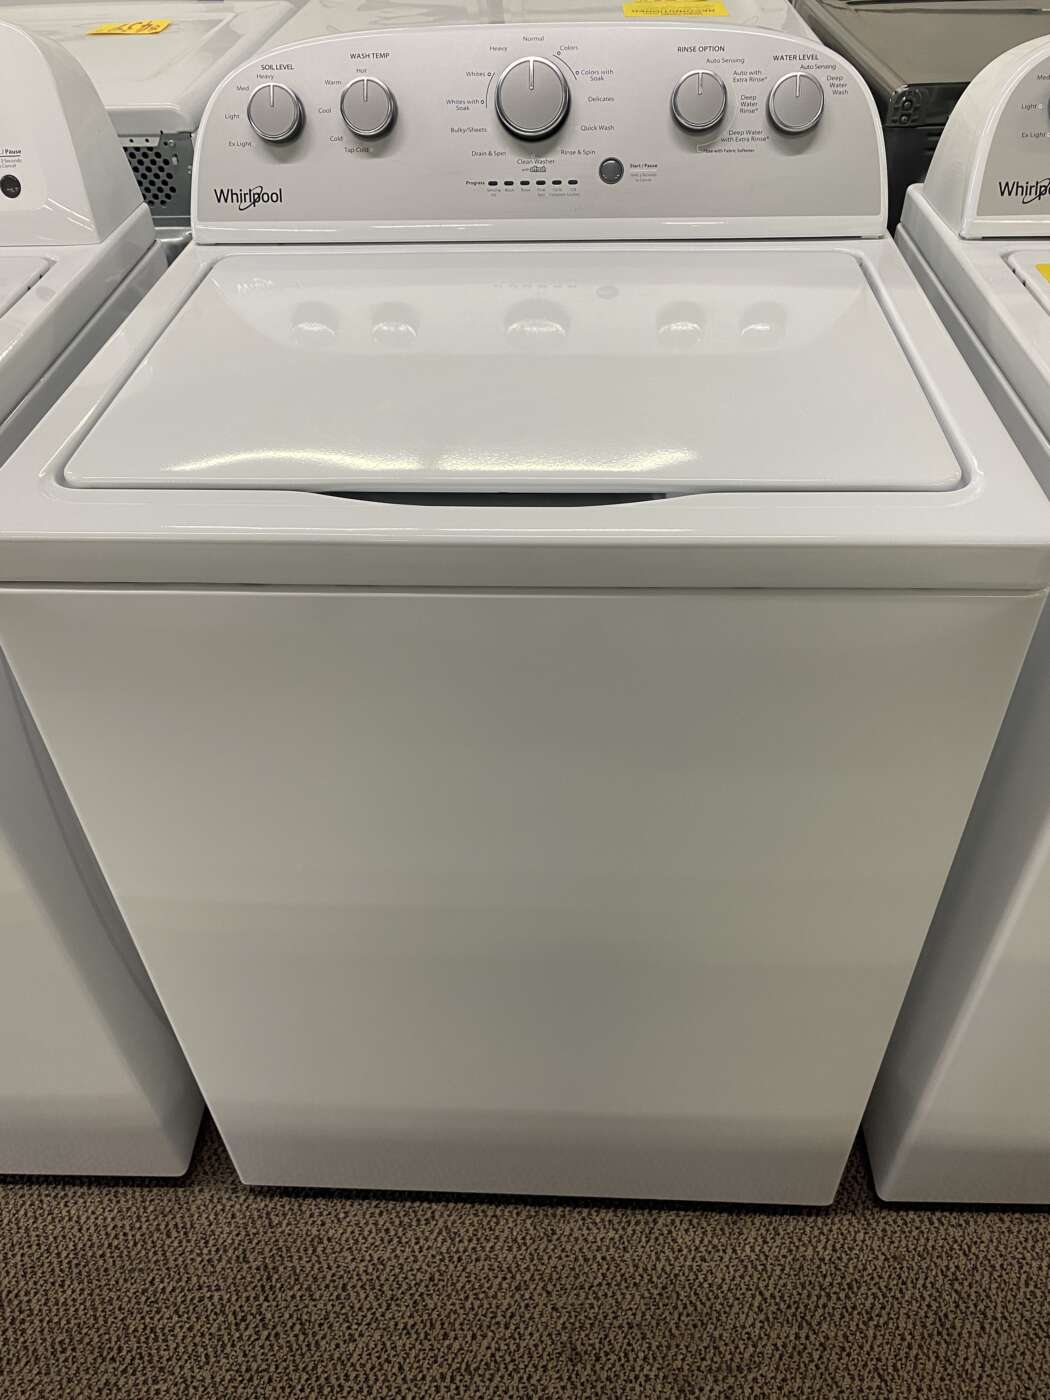 Reconditioned WHIRLPOOL 3.8 Cu. Ft. Top-Load H/E Washer